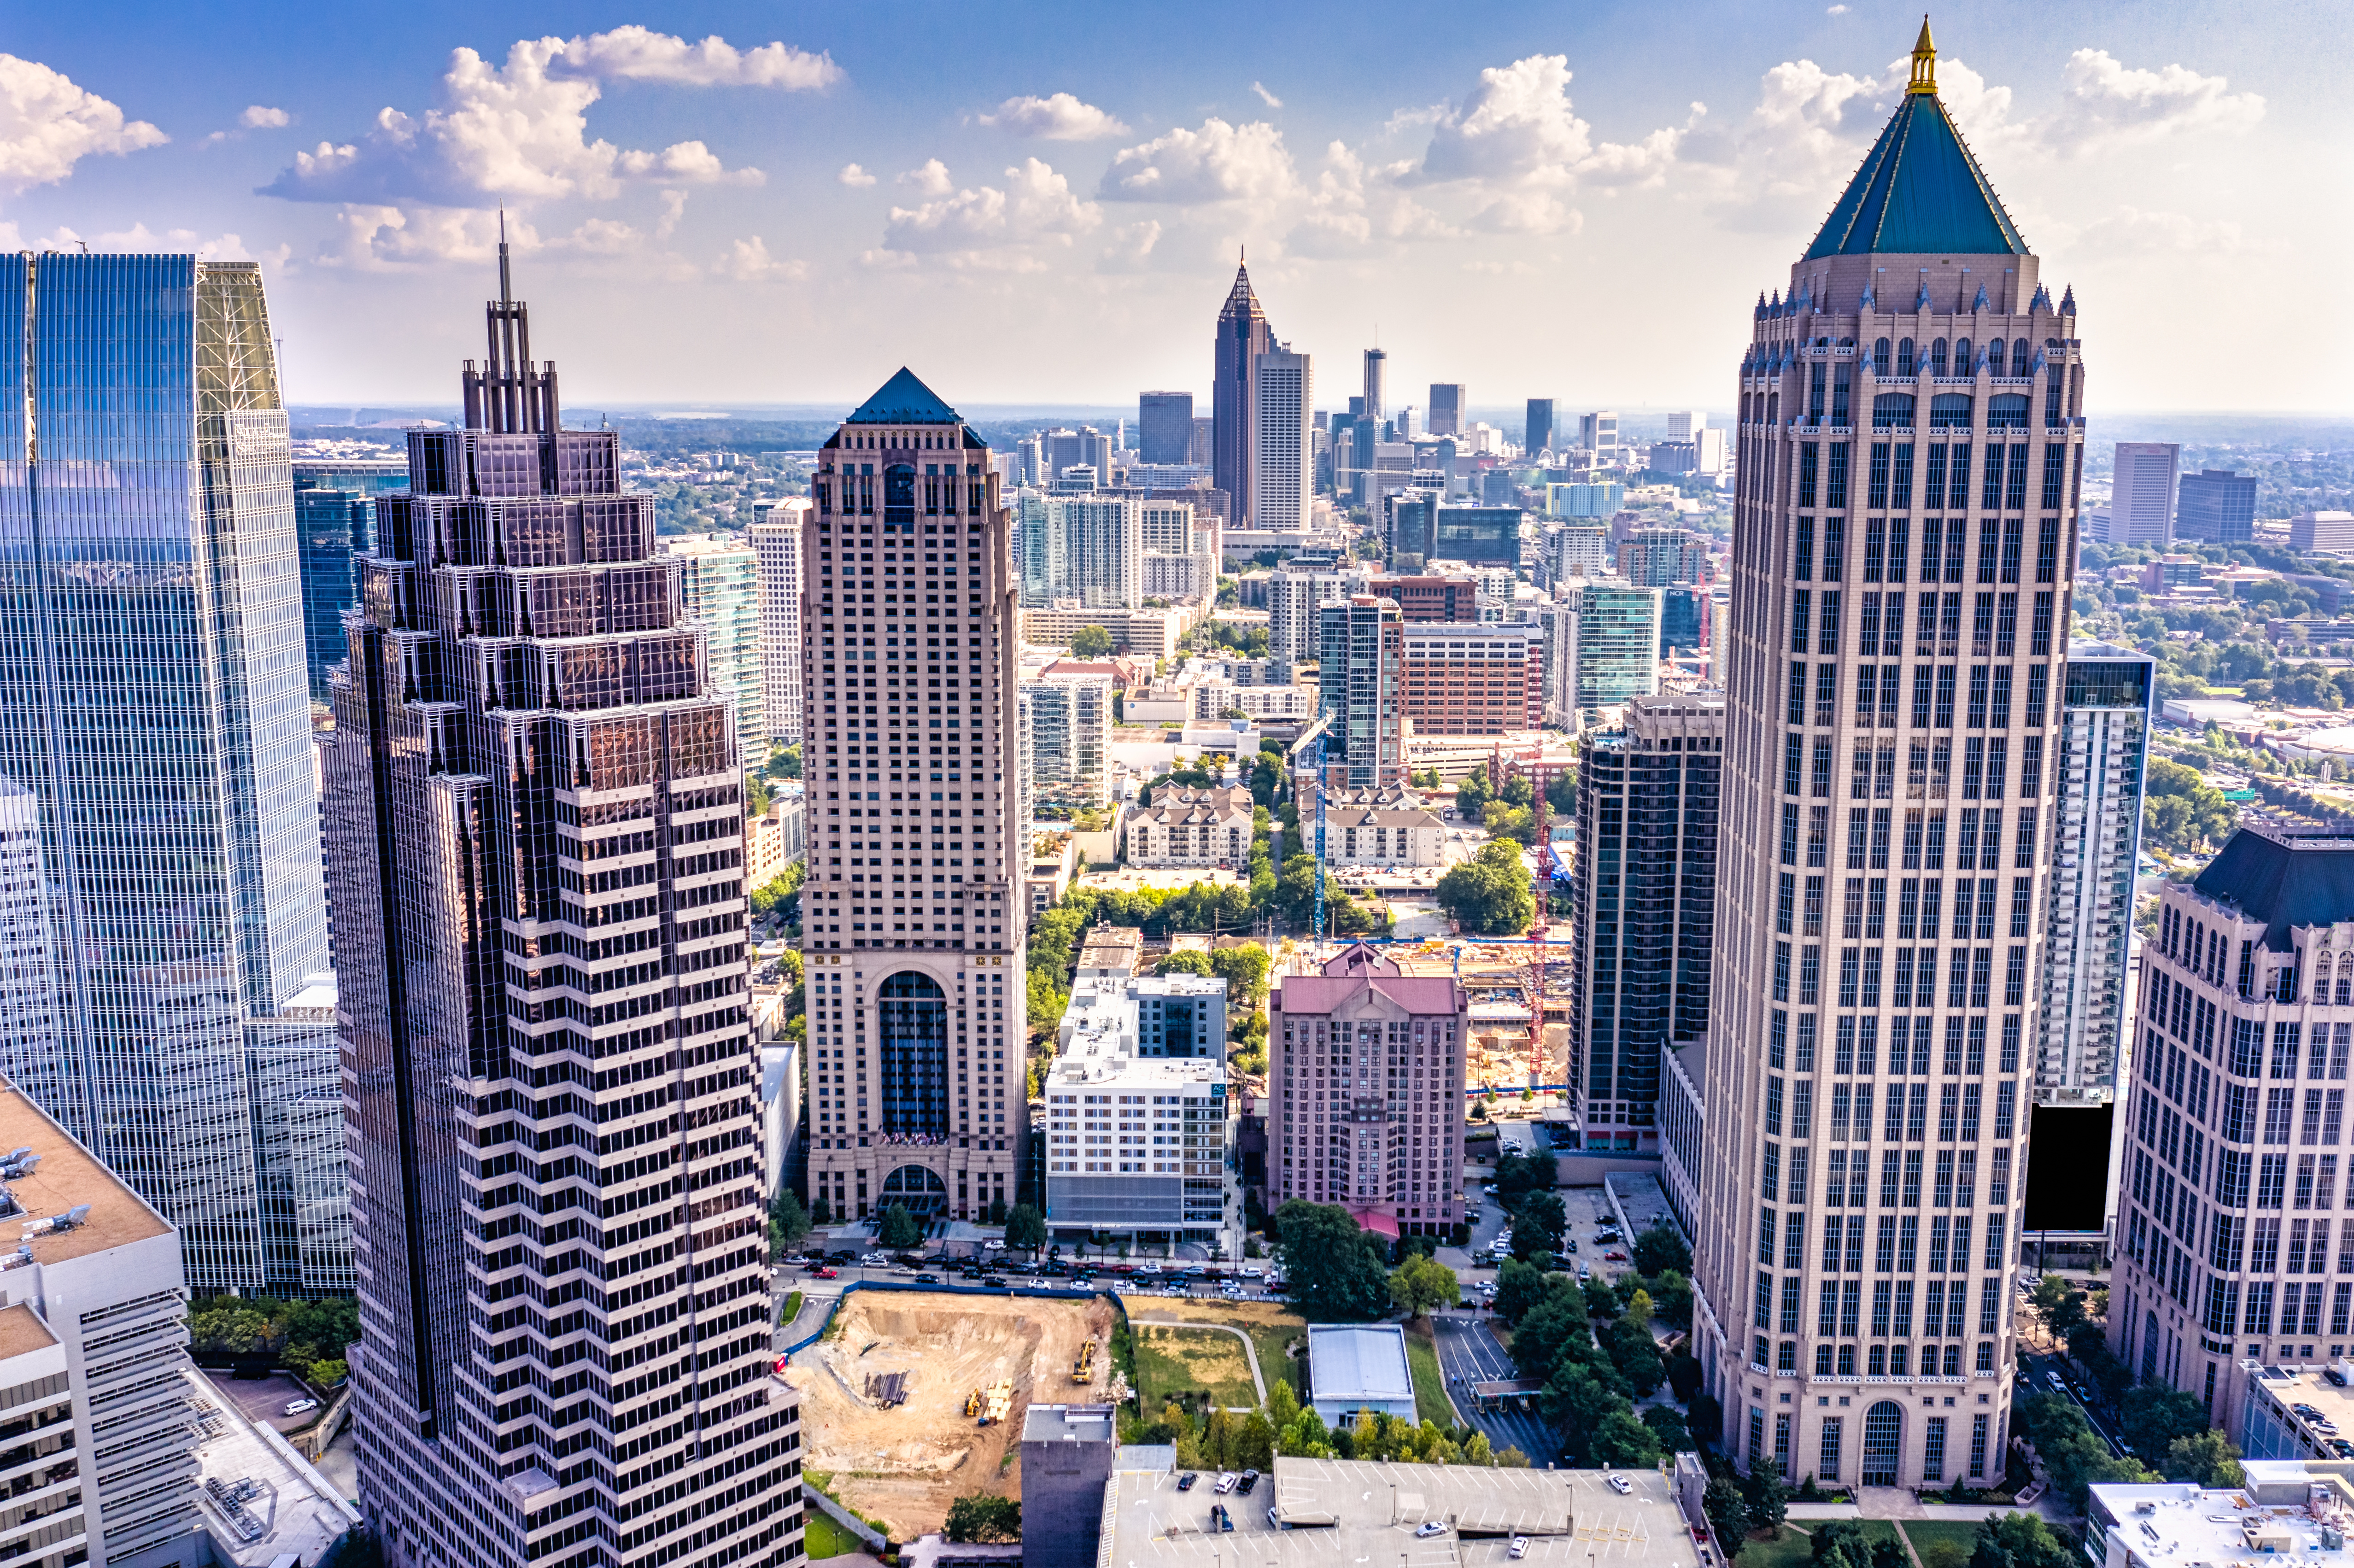 Aerial view downtown Atlanta skyline - Finishing Solutions Network